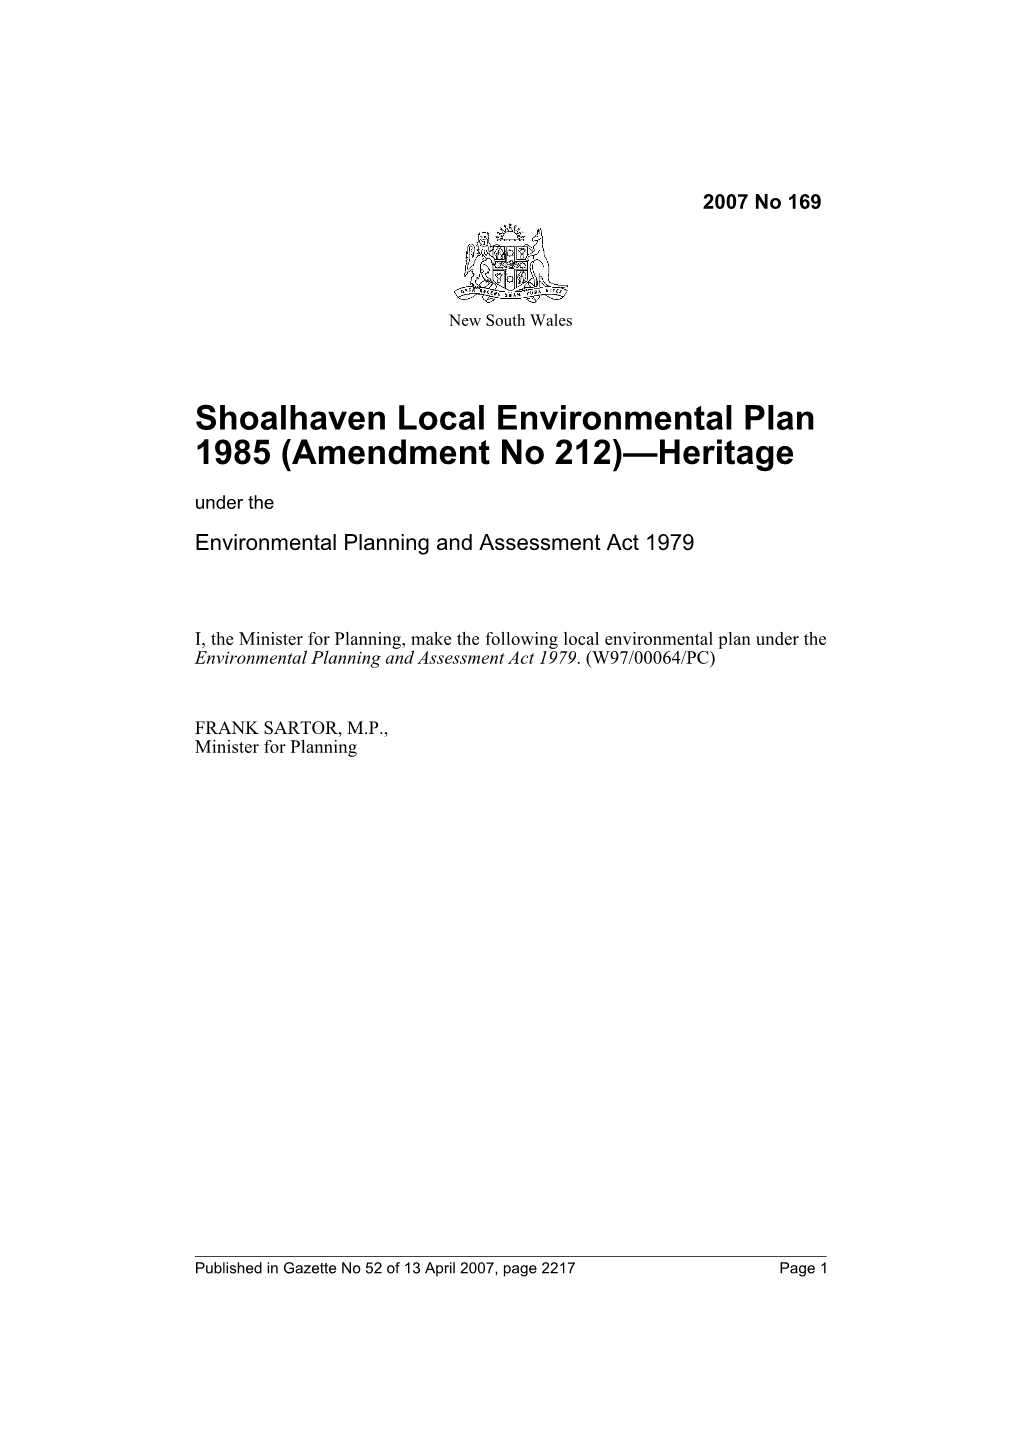 Shoalhaven Local Environmental Plan 1985 (Amendment No 212)—Heritage Under the Environmental Planning and Assessment Act 1979